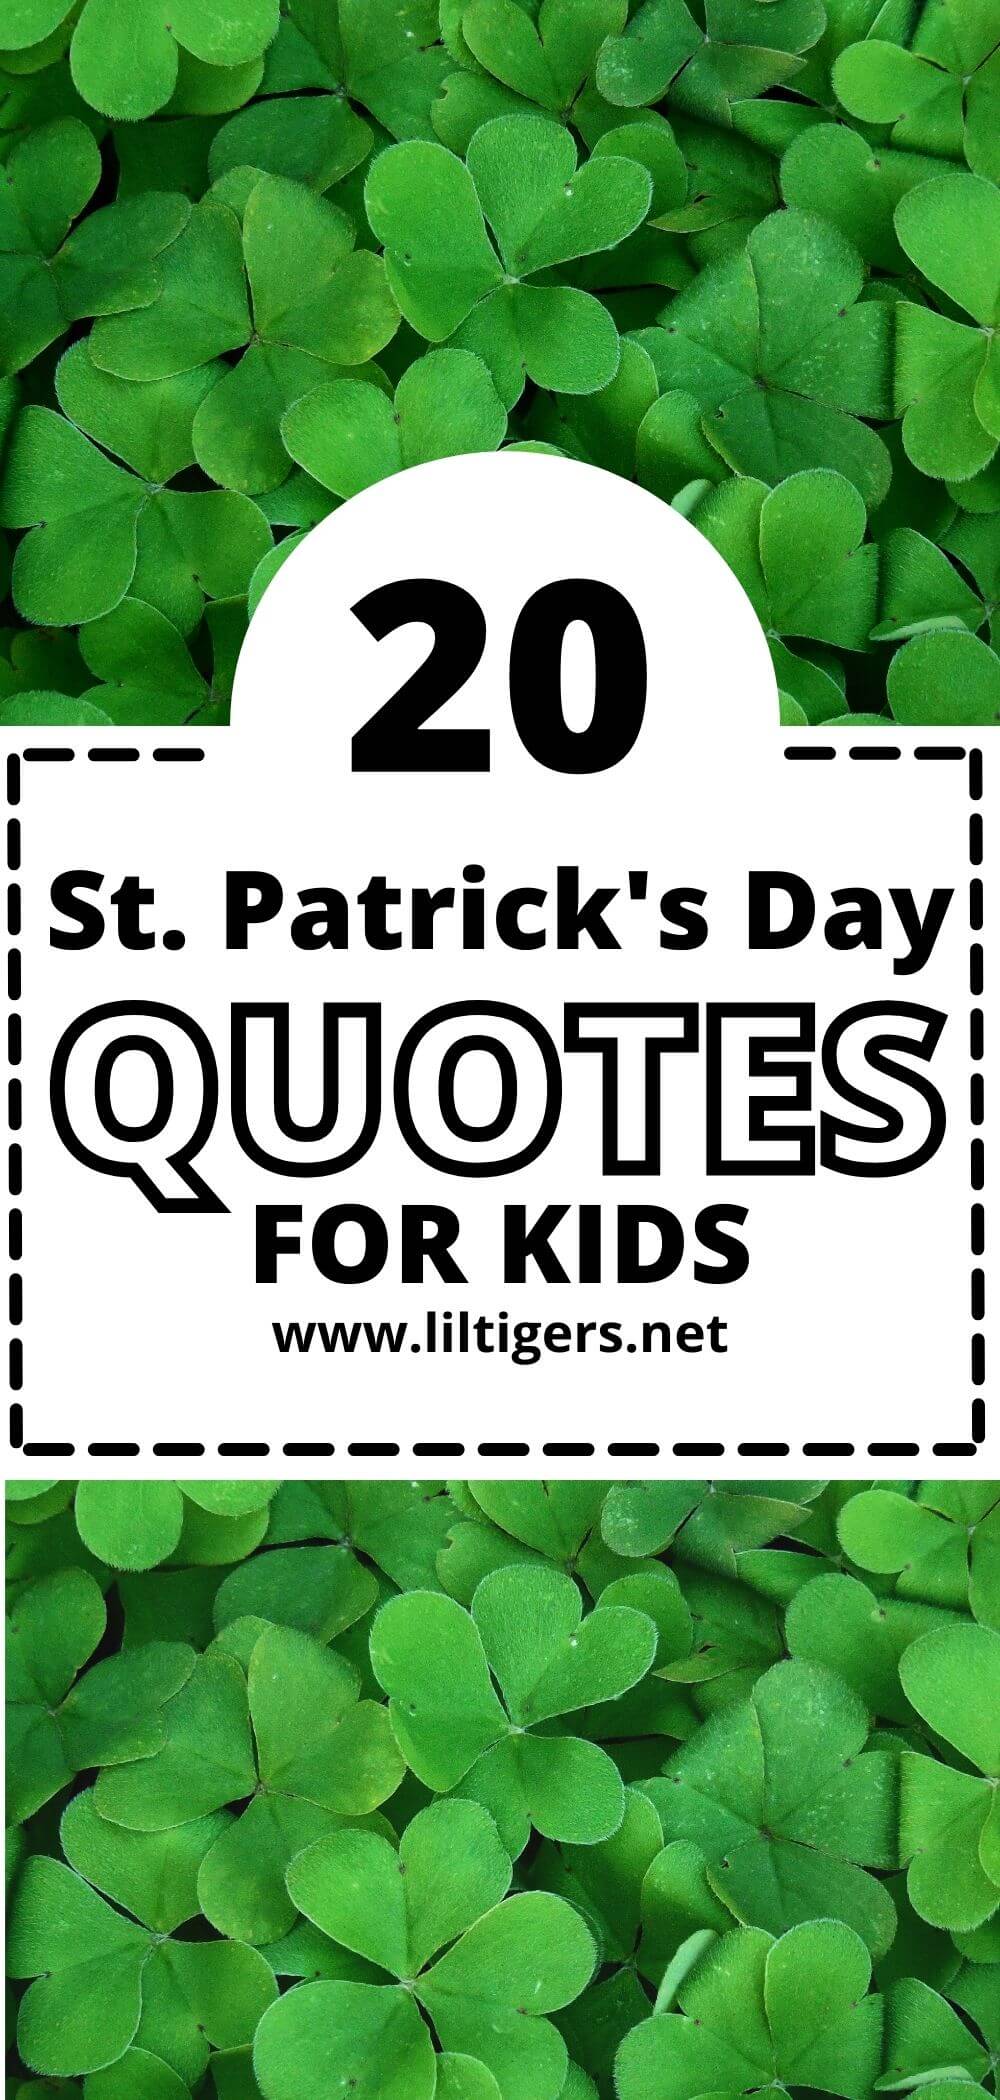 st. patrick's day quotes for kids